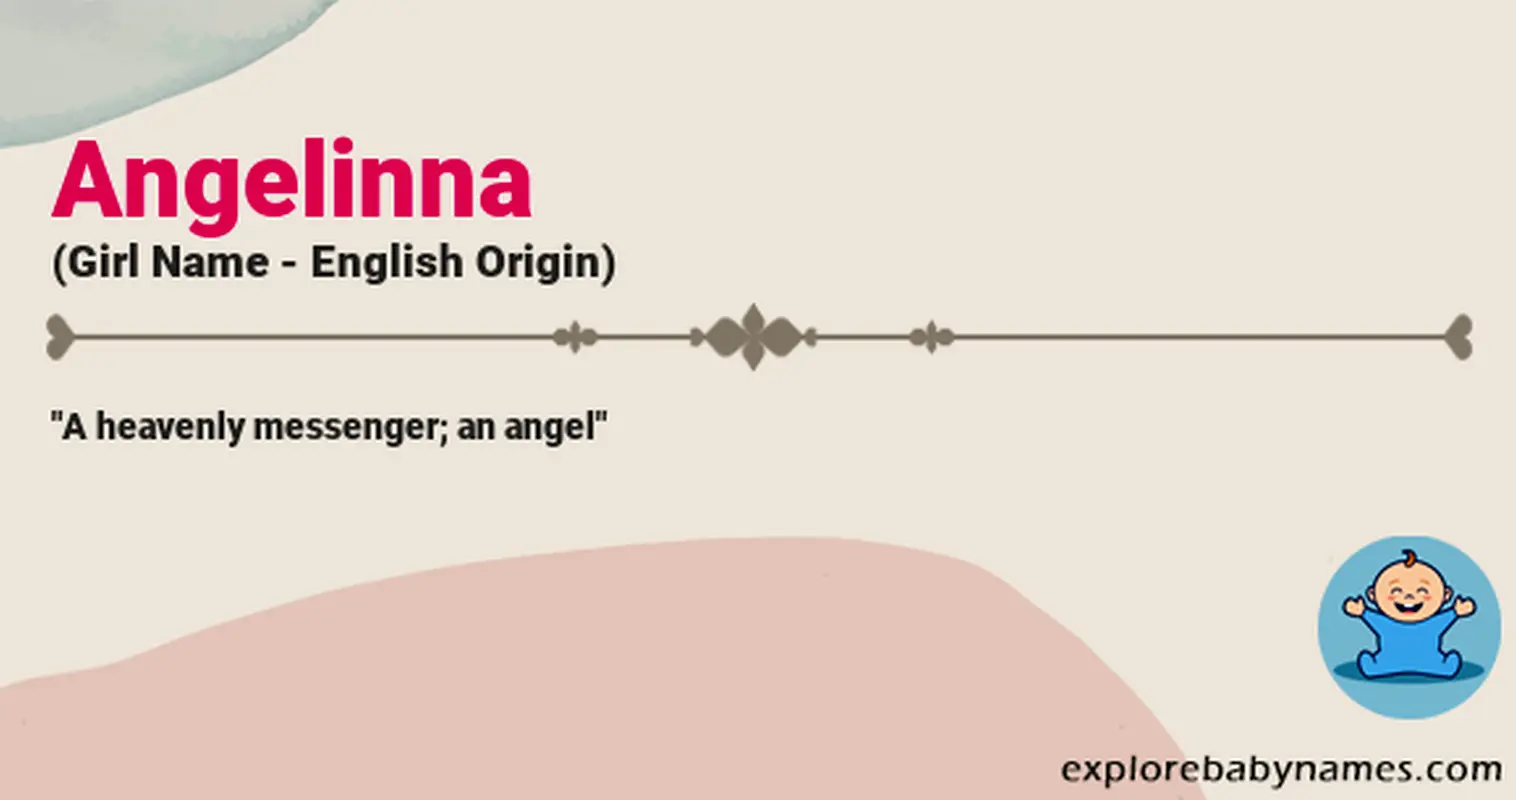 Meaning of Angelinna